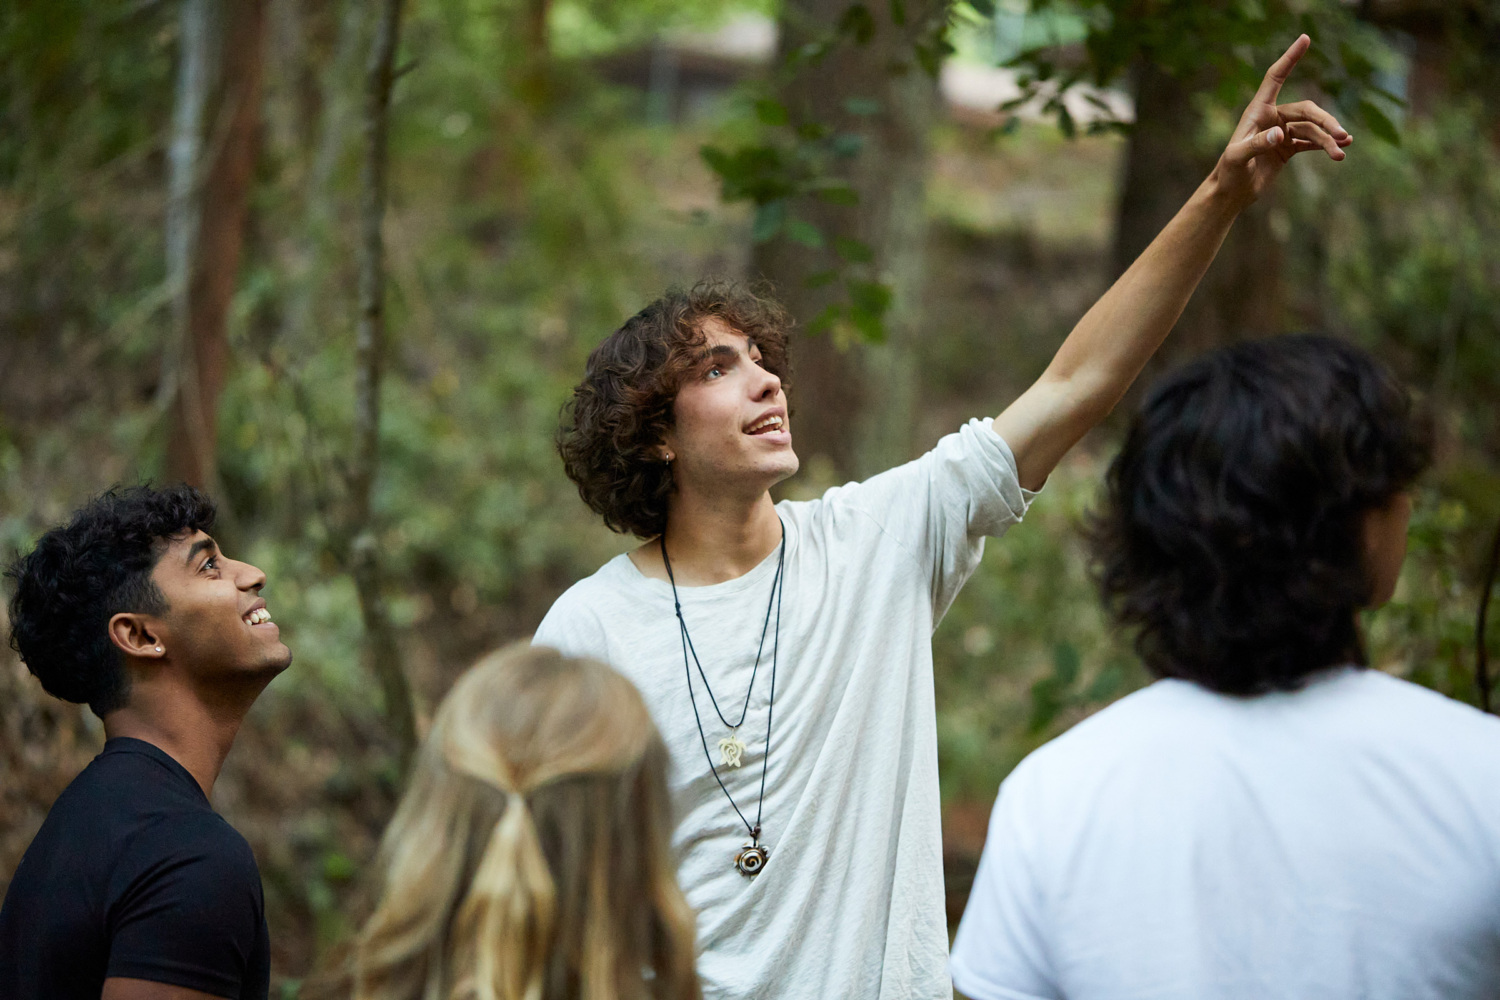 Julian Berkowitz-Sklar points to a tree to a group of students.